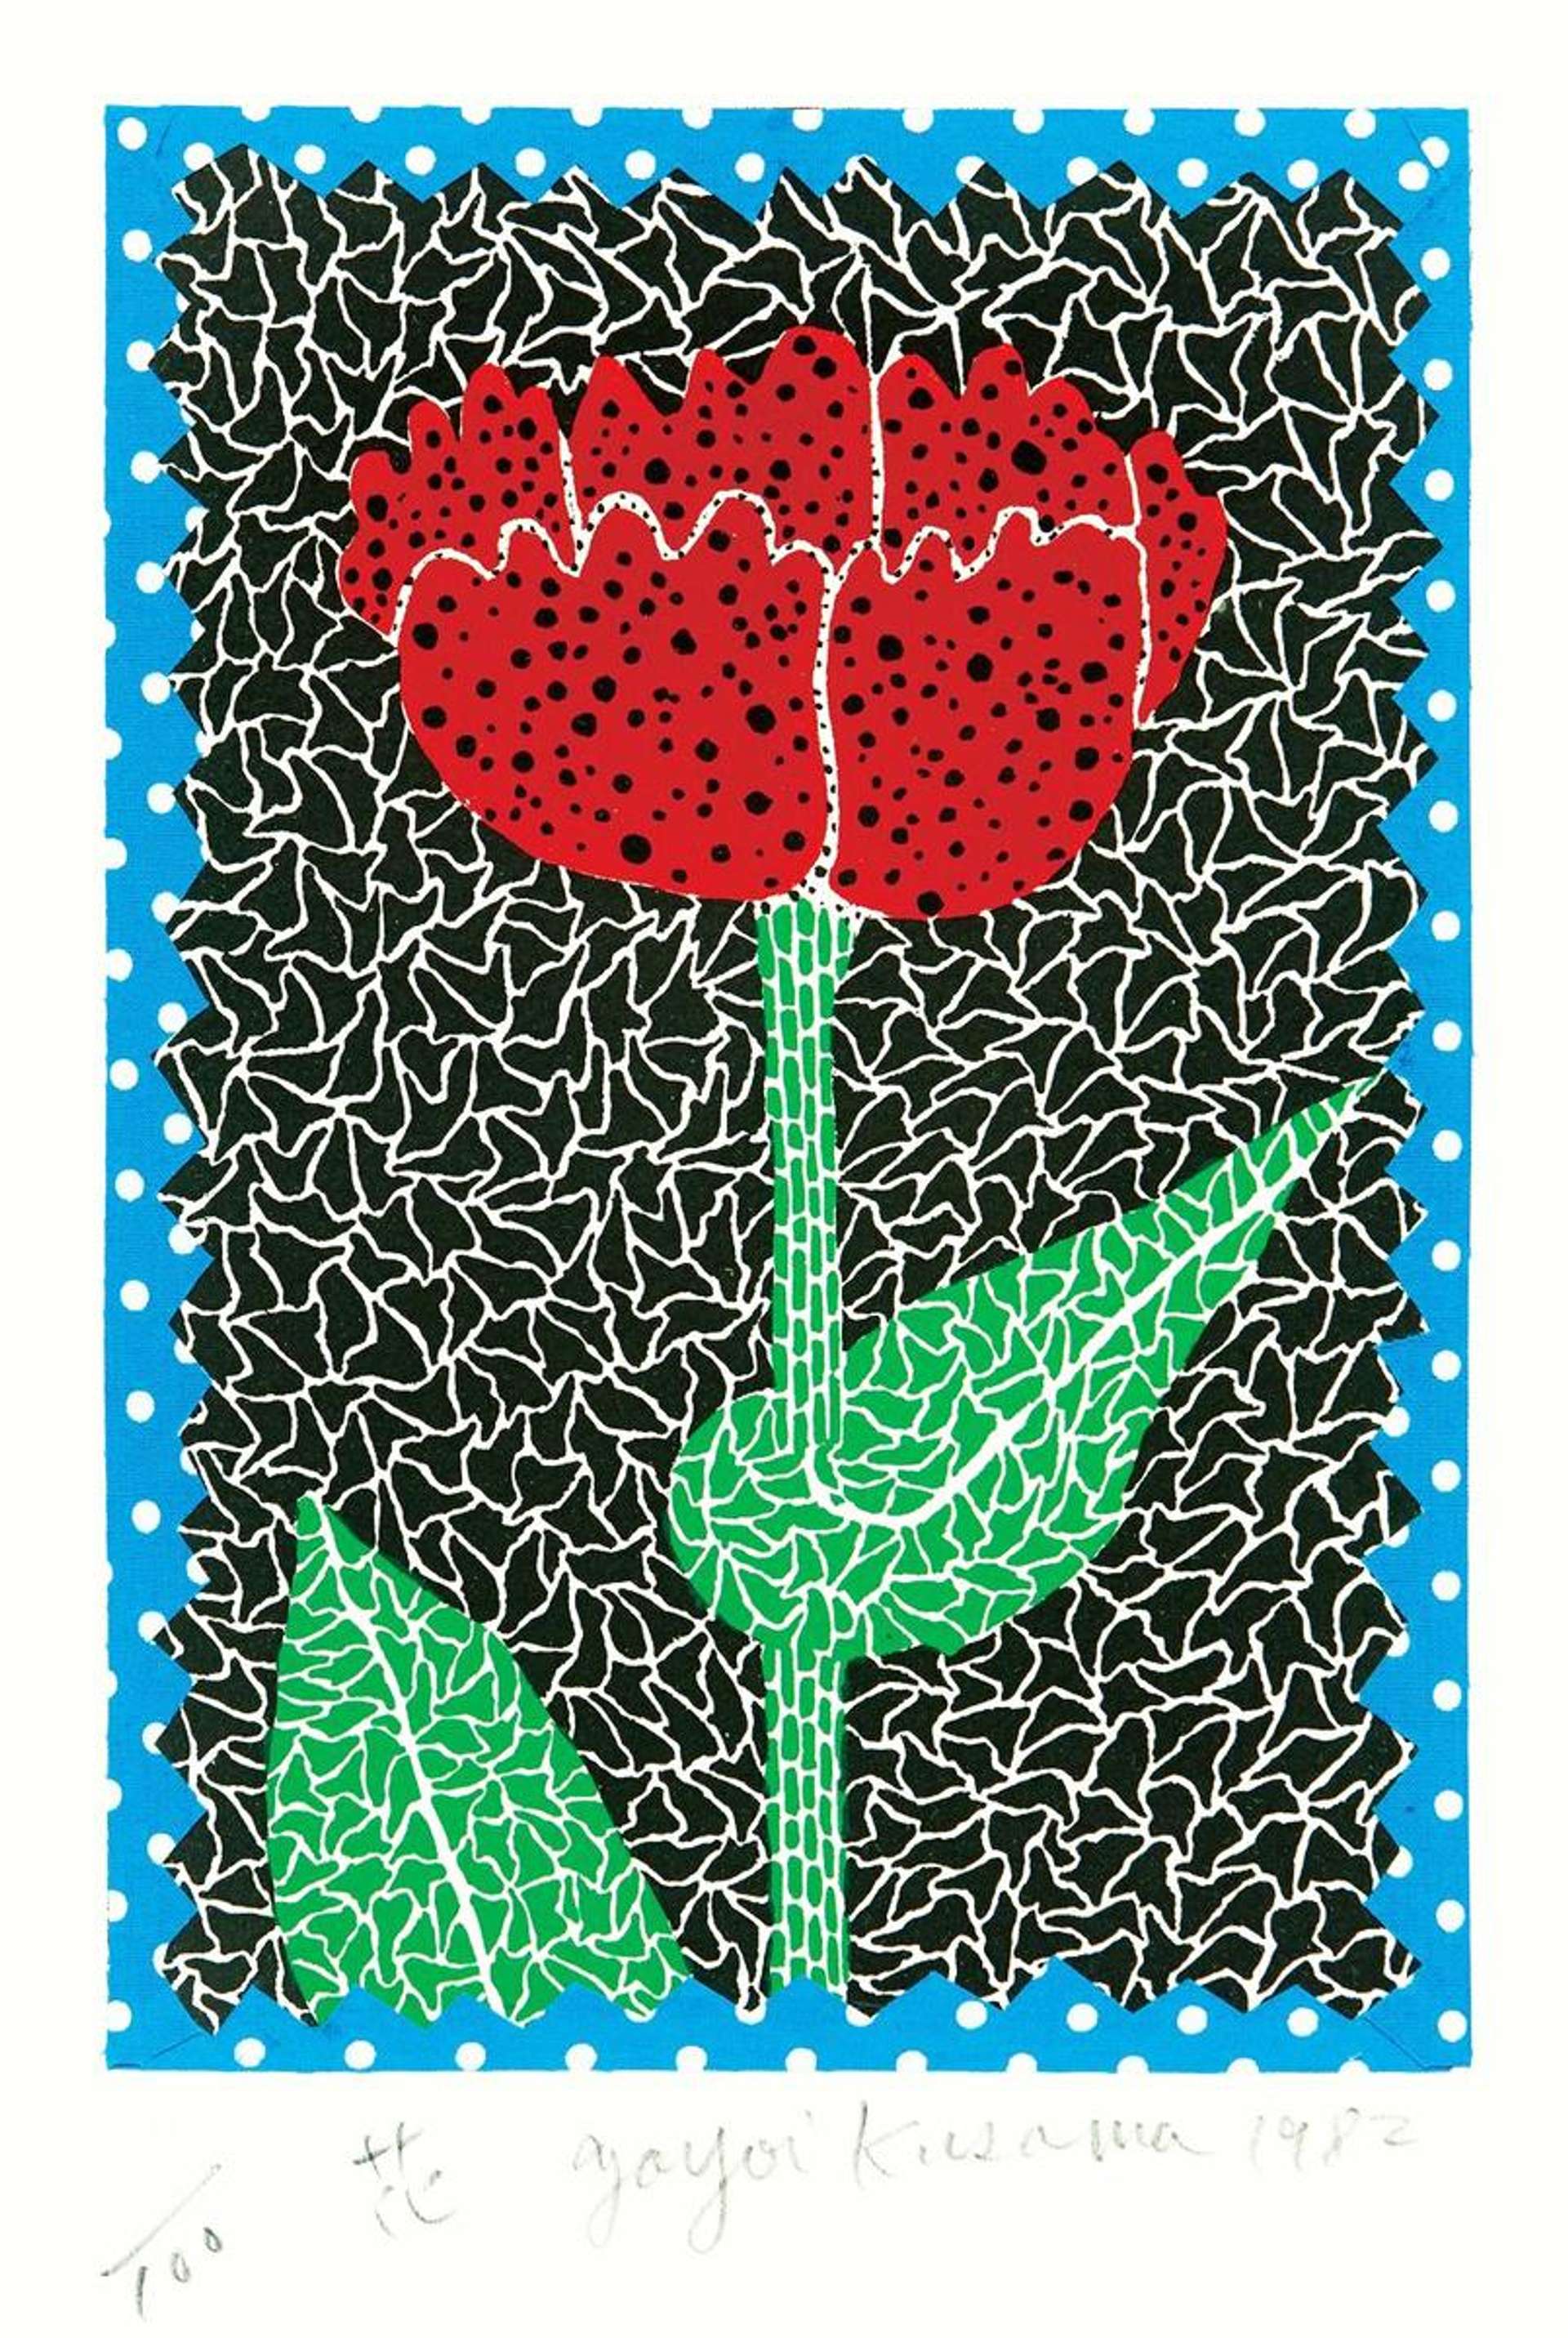 A print of a mosaic-like rendering of a red rose by Yayoi Kusama against a black background with a blue border.